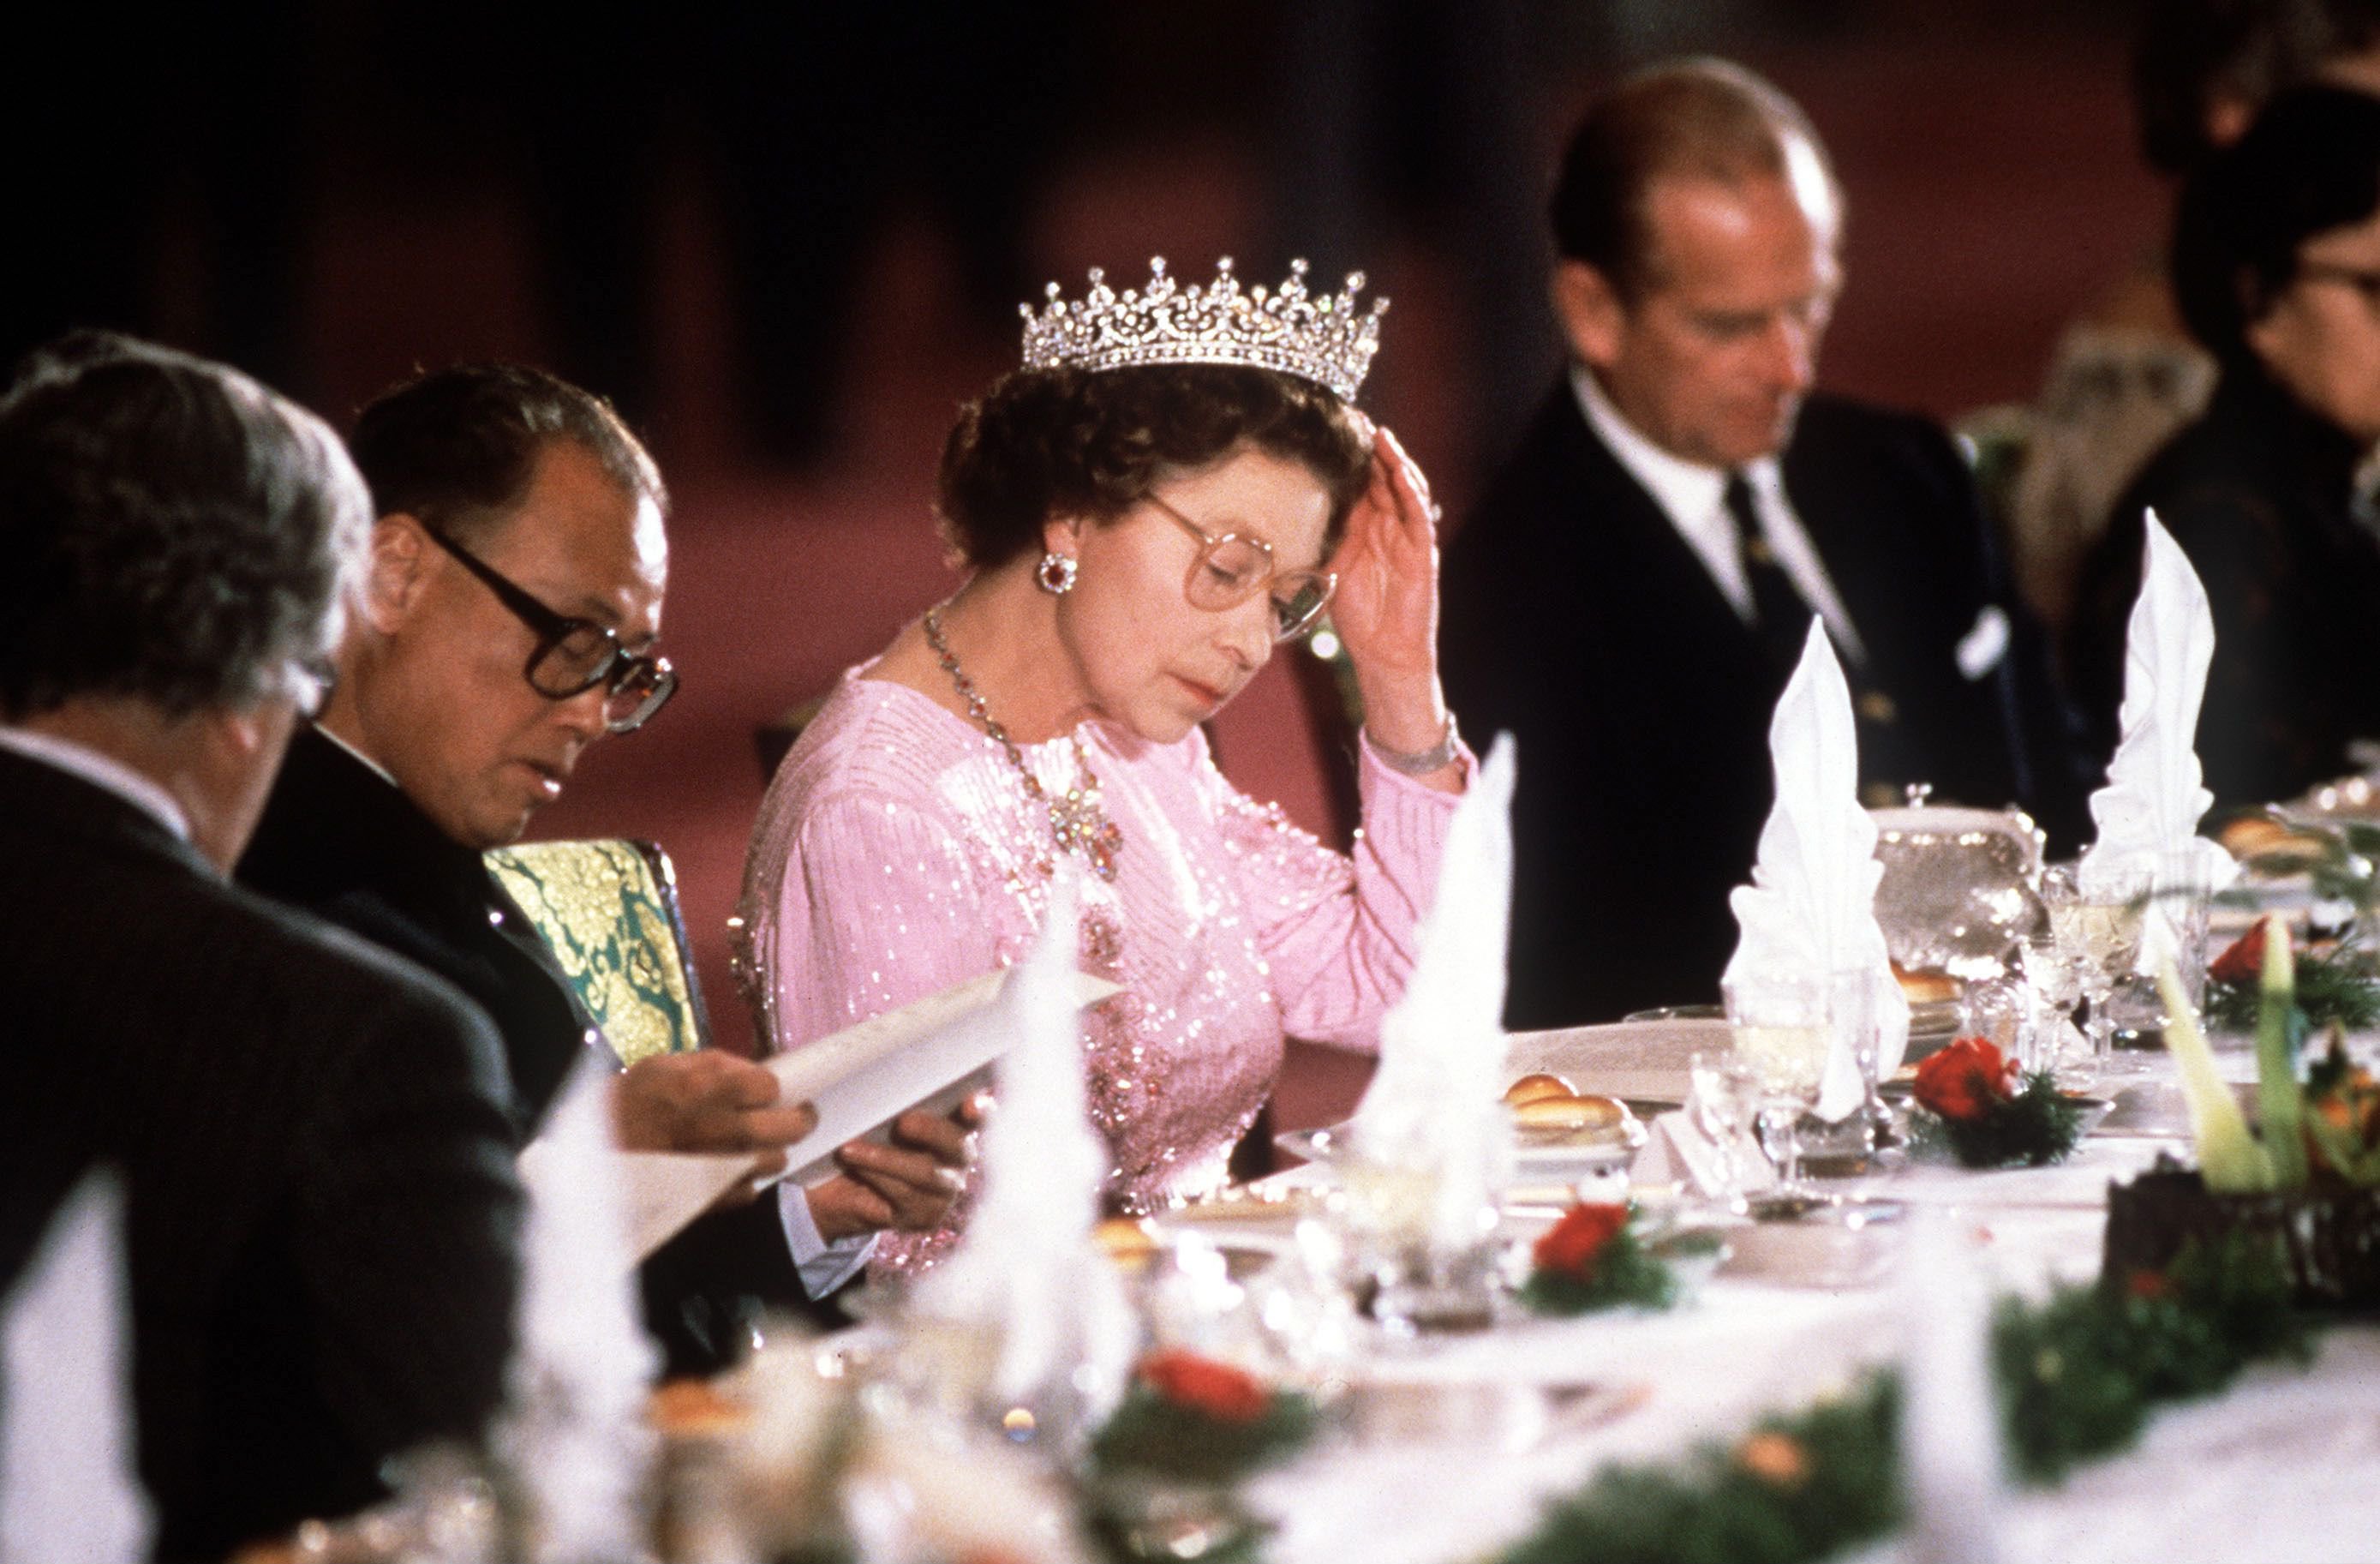 17 Interesting Eating Habits And Dining Rules The Royal Family Still